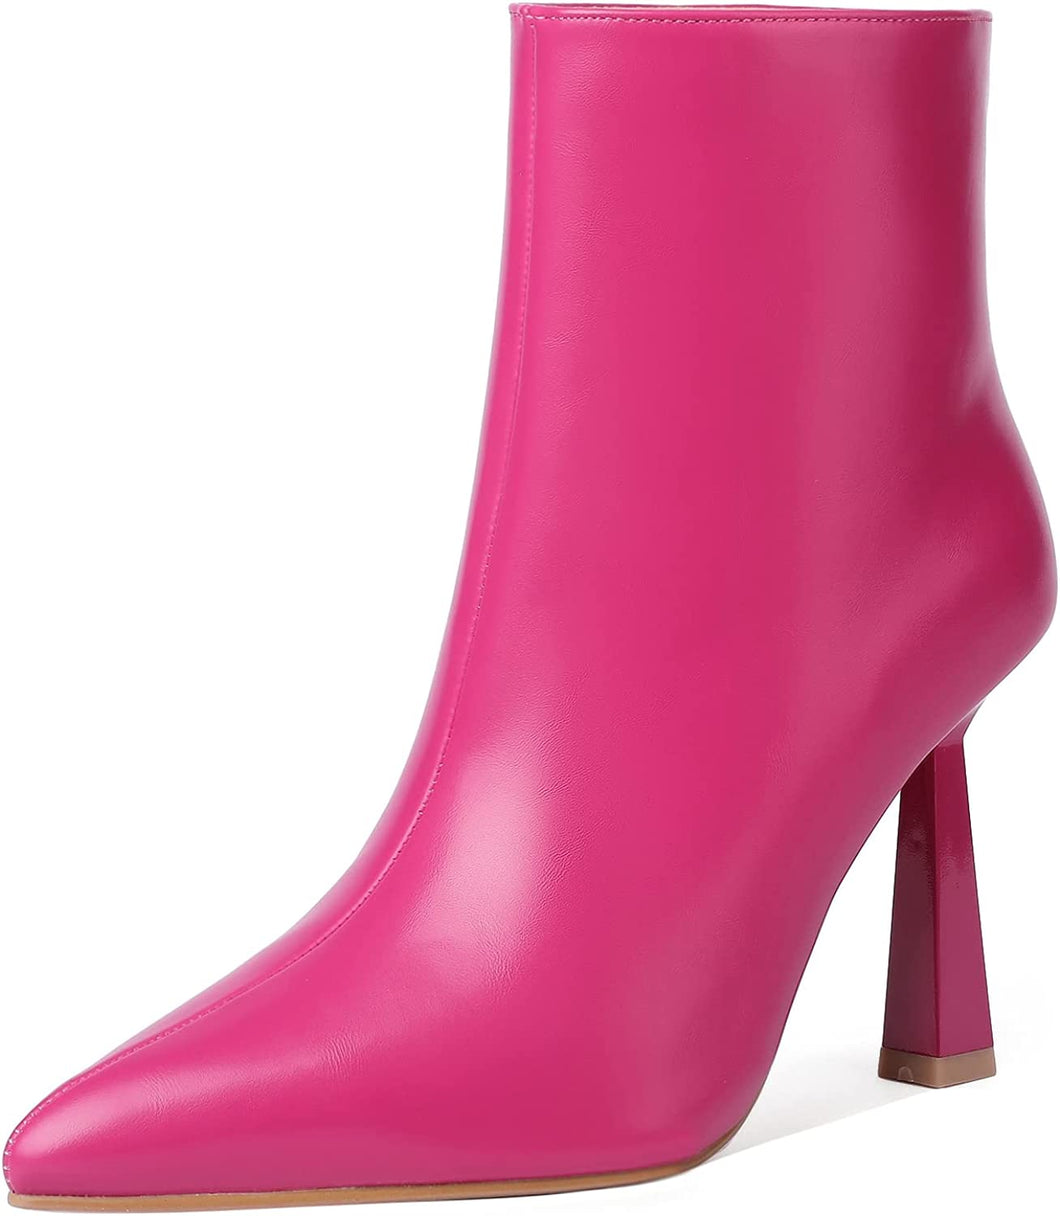 Goddess Hot Pink Pointed Toe Stiletto High Heeled Booties